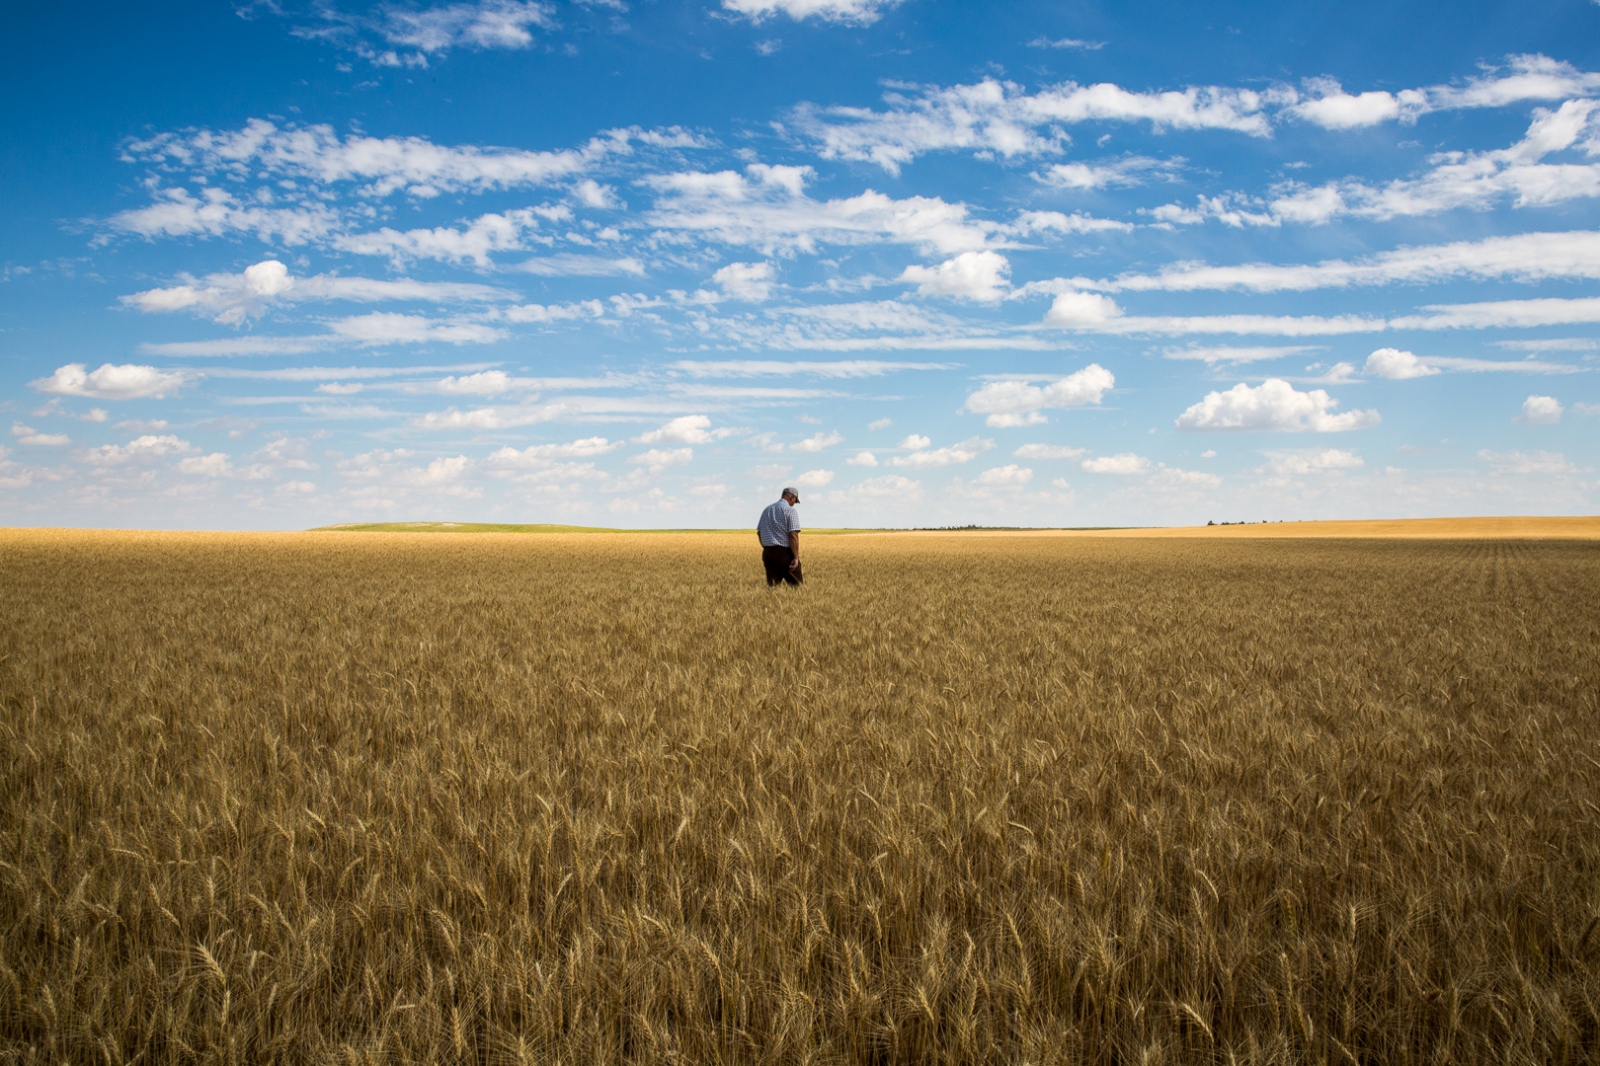  Eric Wolgemuth, a thirty-year harvesting veteran and land owner, walks through one of his wheat fields in Kimball, NE, July 2017. 